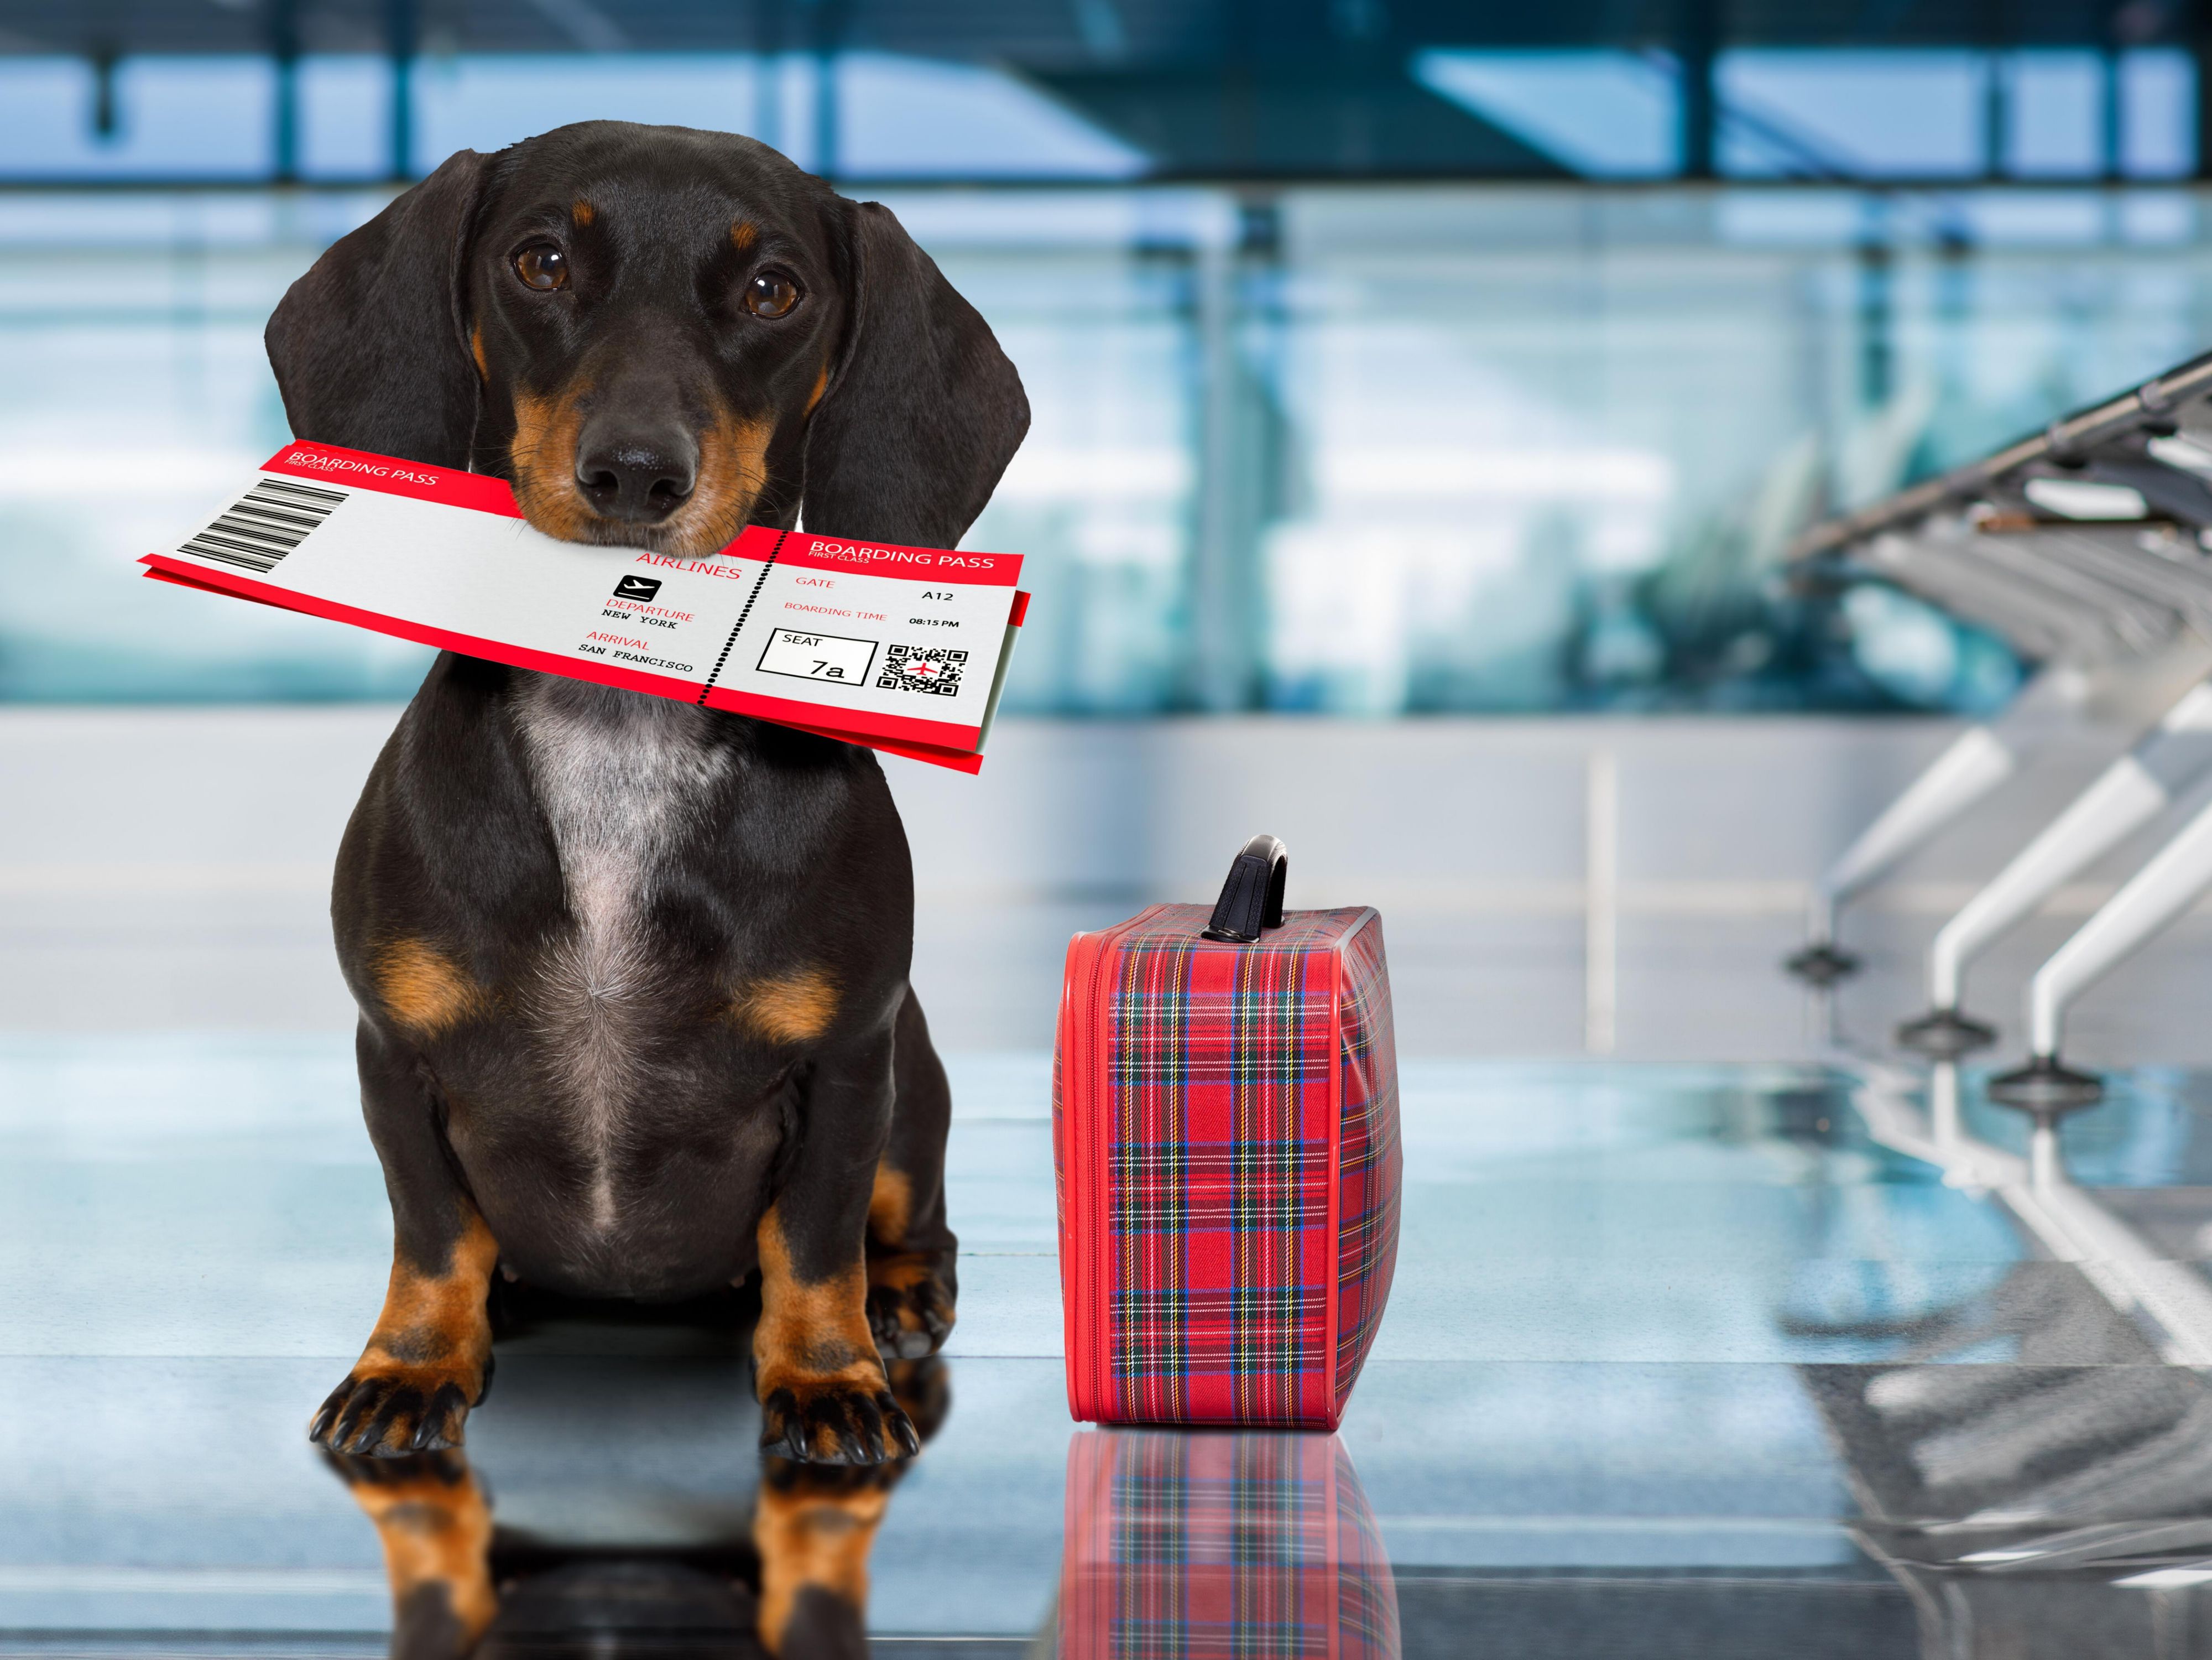 Traveling with your furry best friend? We are now a pet friendly hotel! Contact us today for more details. 